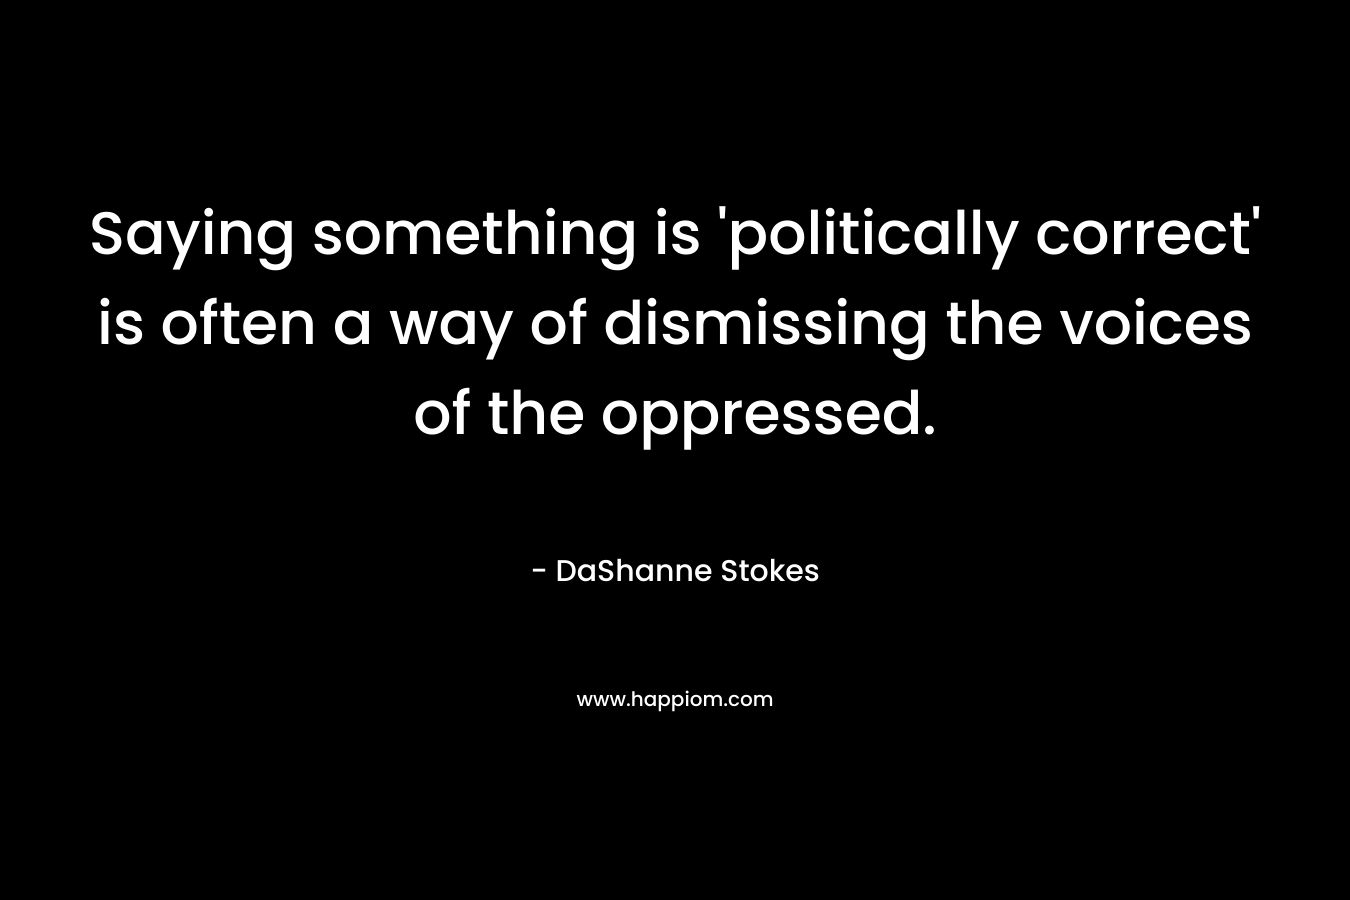 Saying something is ‘politically correct’ is often a way of dismissing the voices of the oppressed. – DaShanne Stokes